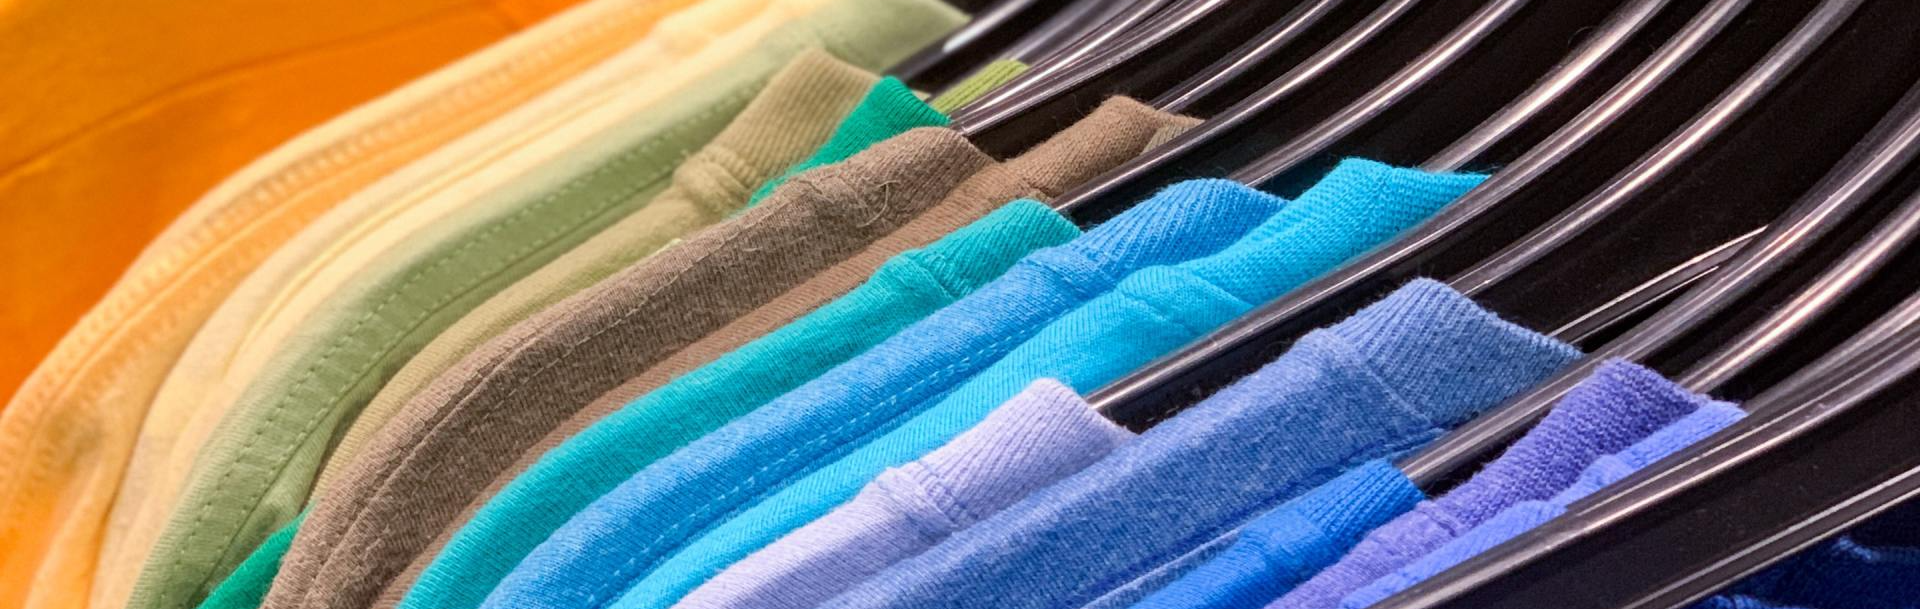 Clothes Organized by Color